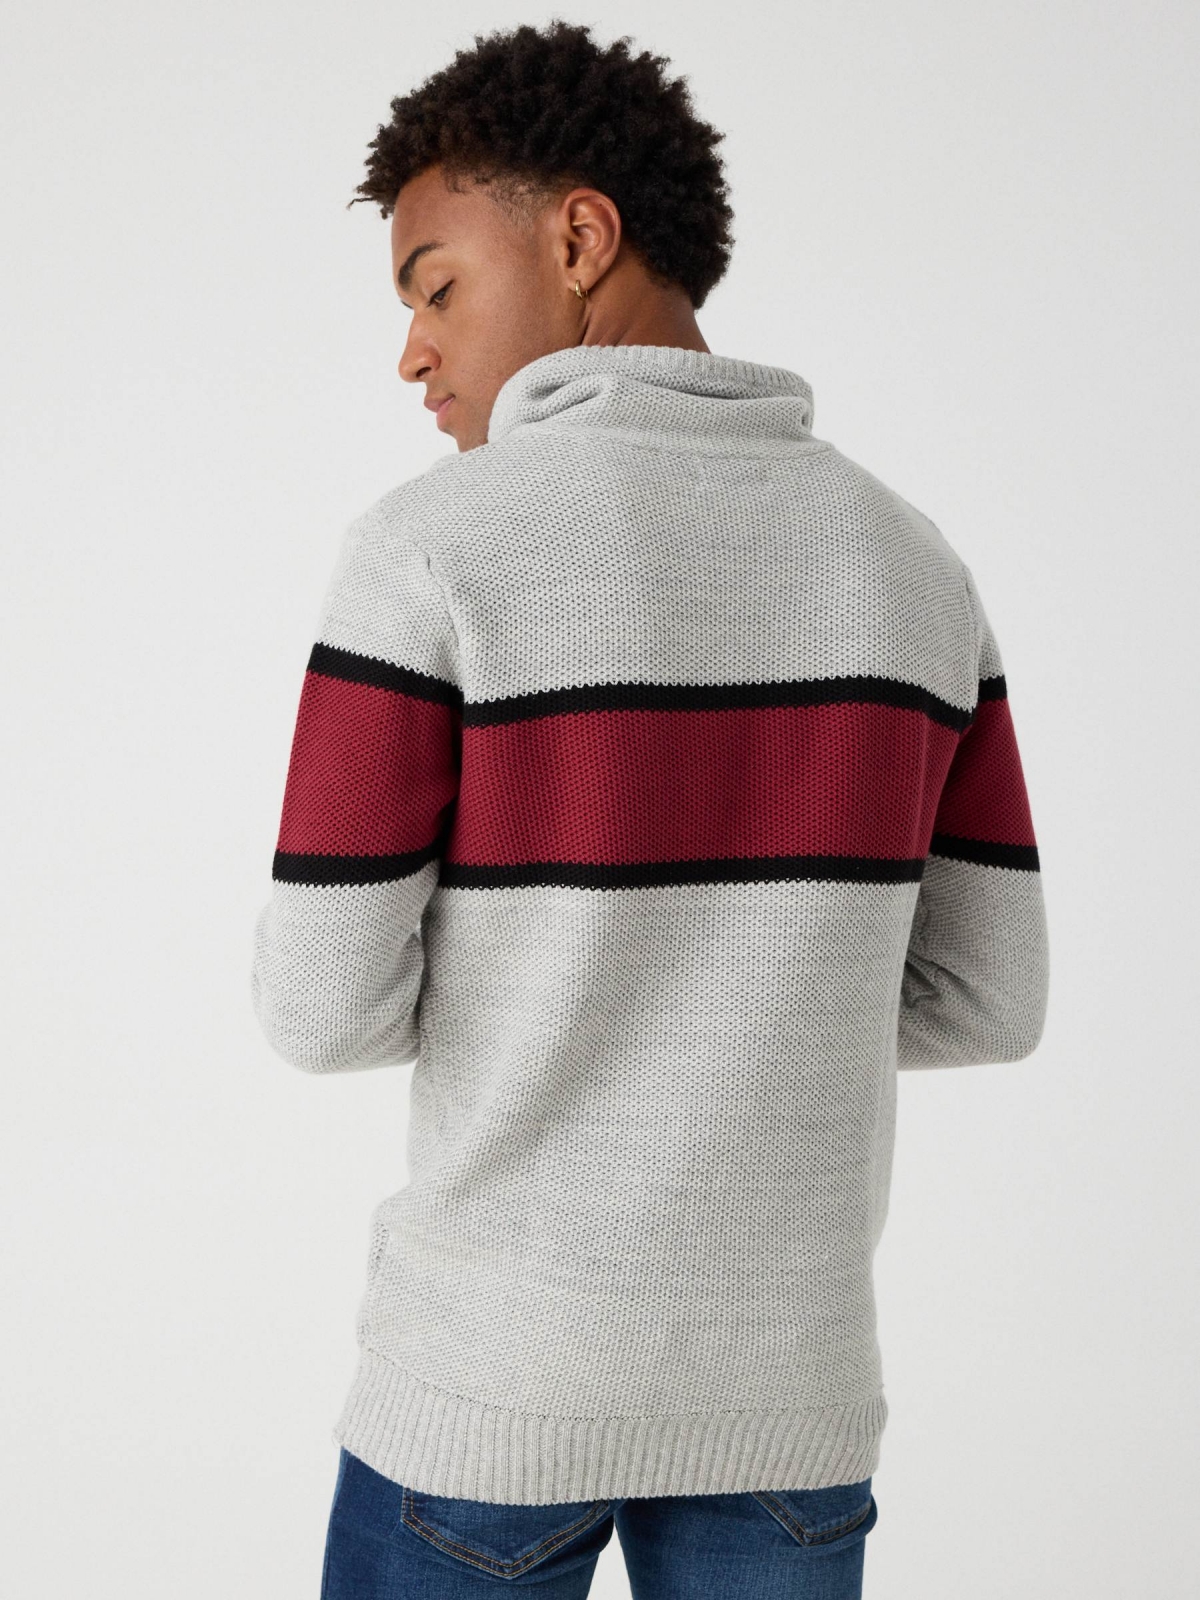 Striped sweater with hood light grey middle back view